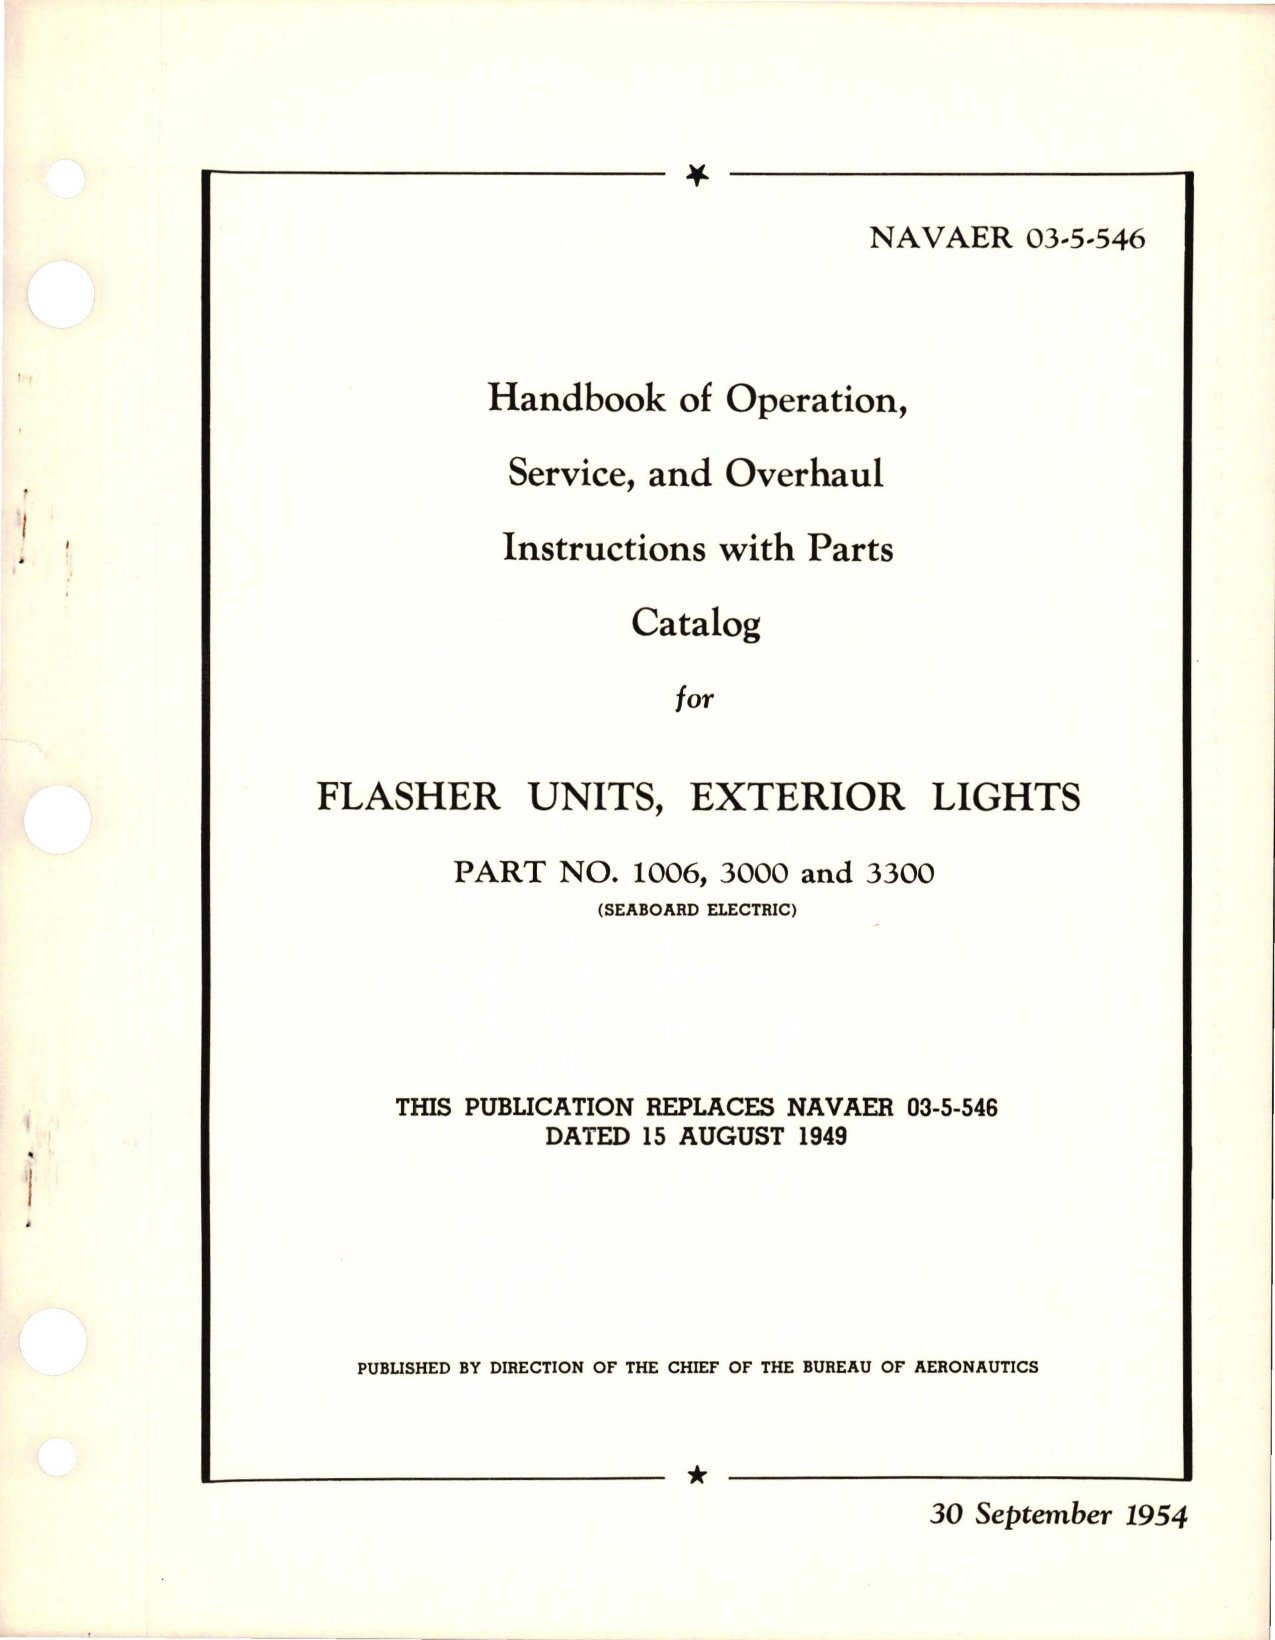 Sample page 1 from AirCorps Library document: Operation, Service and Overhaul Instructions with Parts Catalog for Exterior Lights Flasher Units - Parts 1006, 3000, and 3300